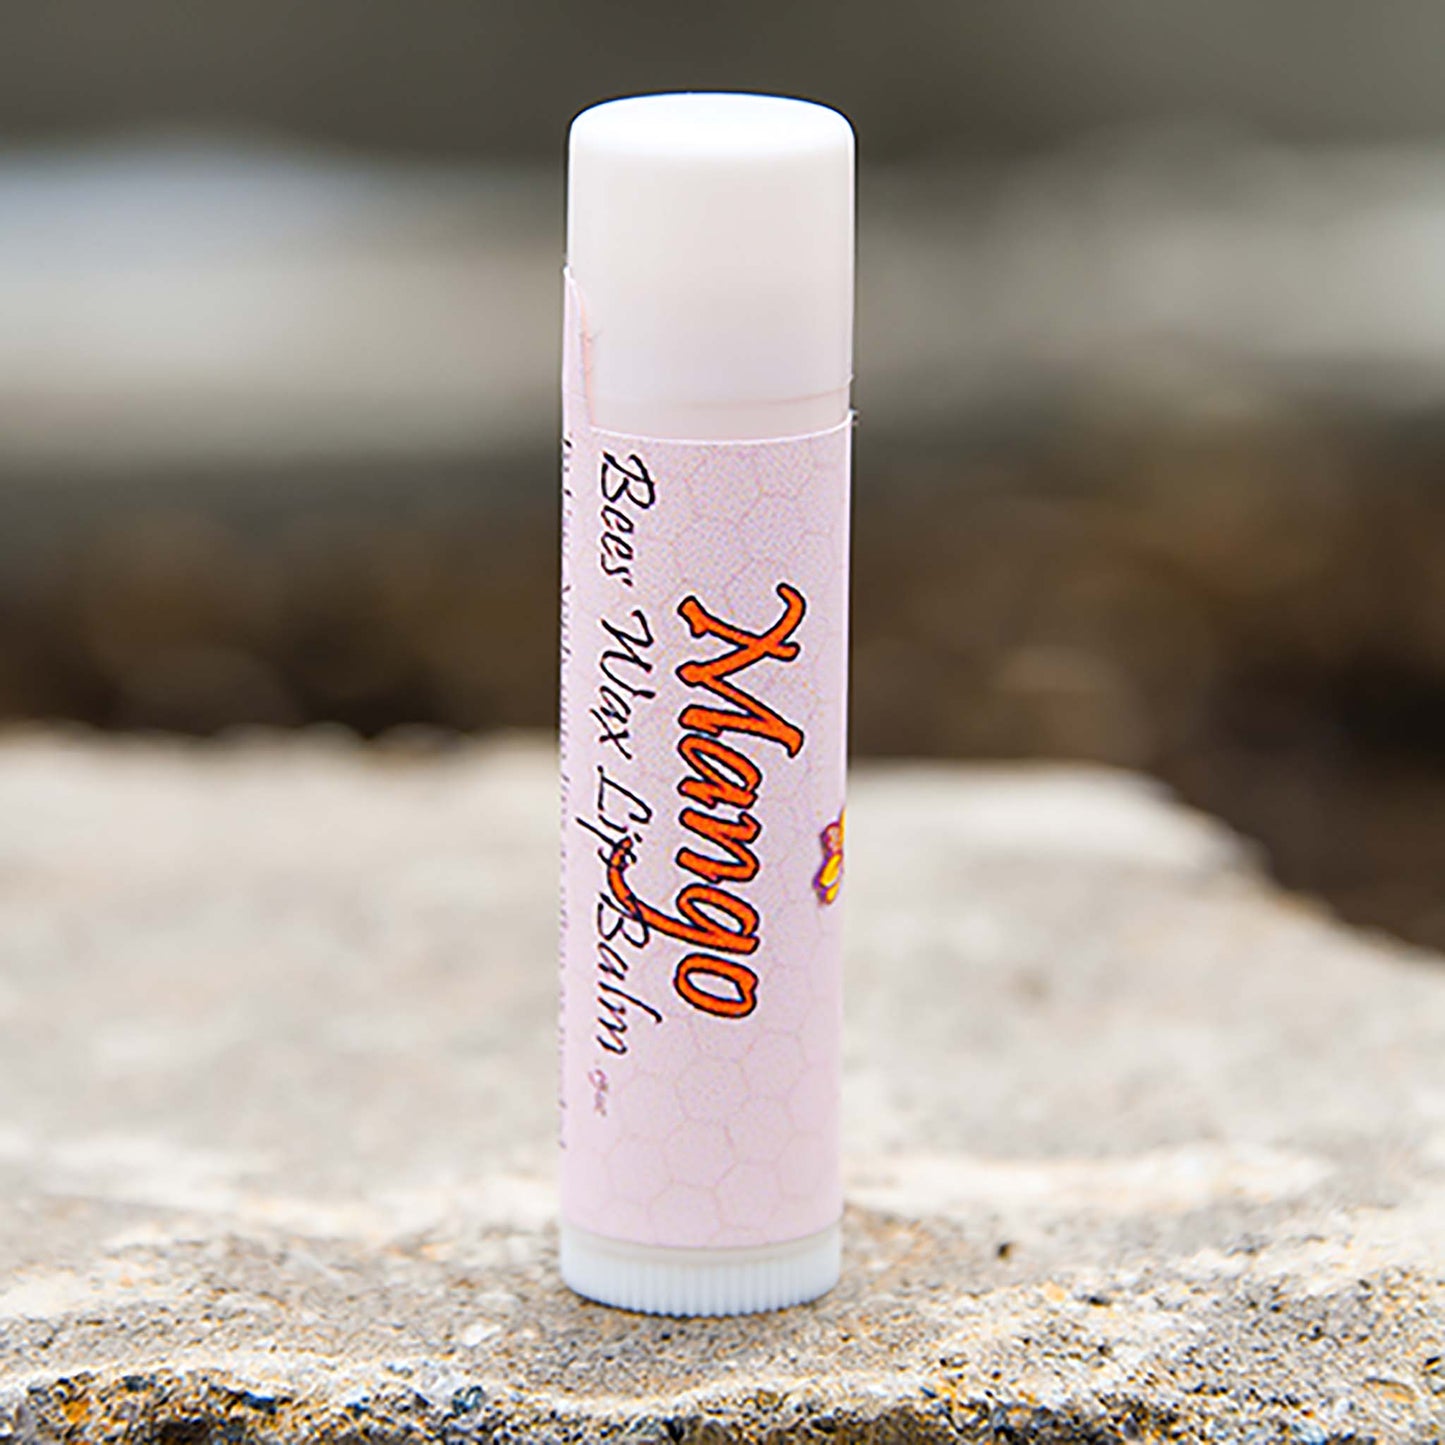 Mango Bees Wax Lip Balm From Bee Your Own Valentine